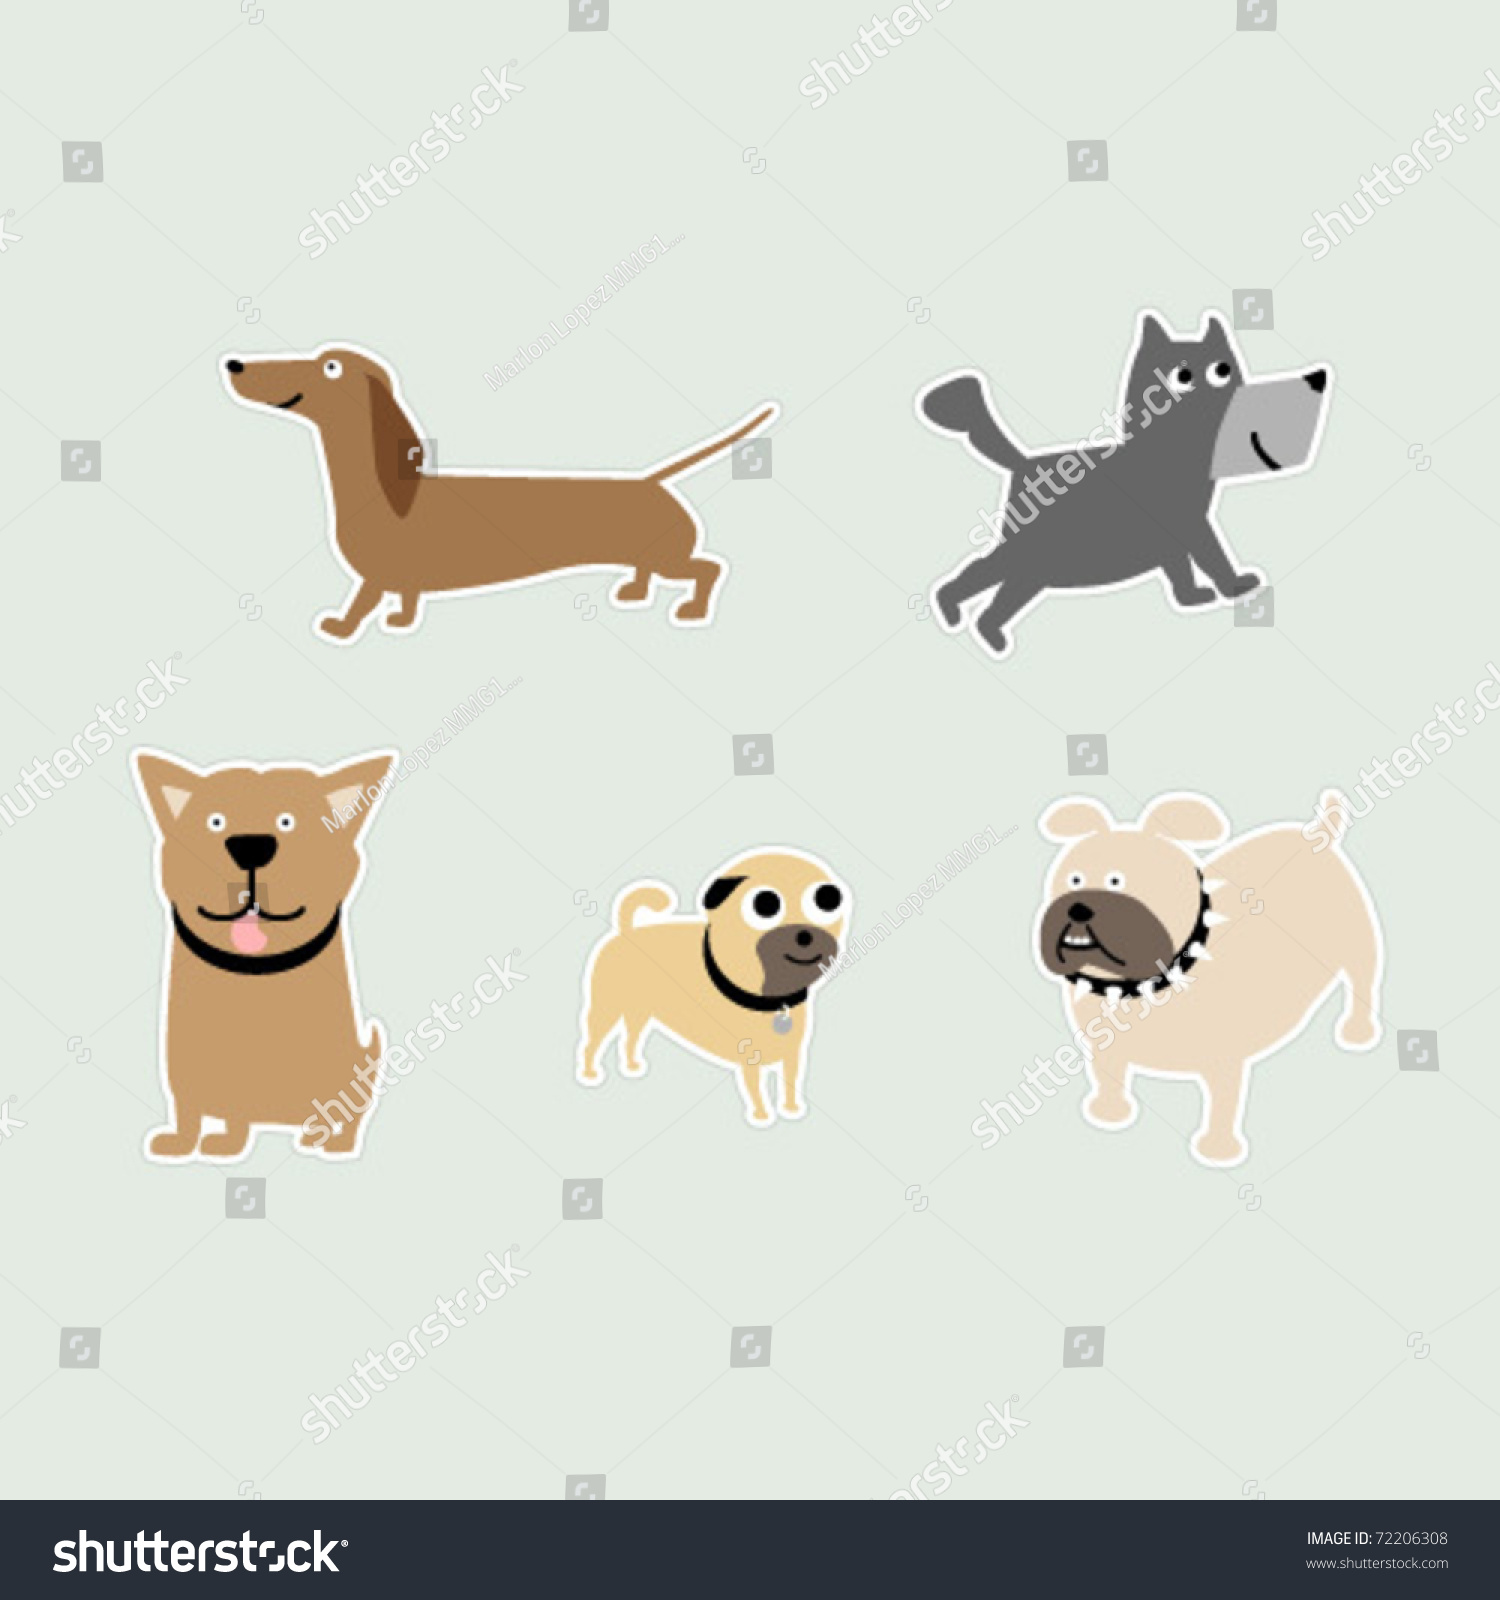 SVG of Five breeds of dogs as stickers; Dachshund, Pit-bull, Bulldog, Pug, and a Terrier. svg